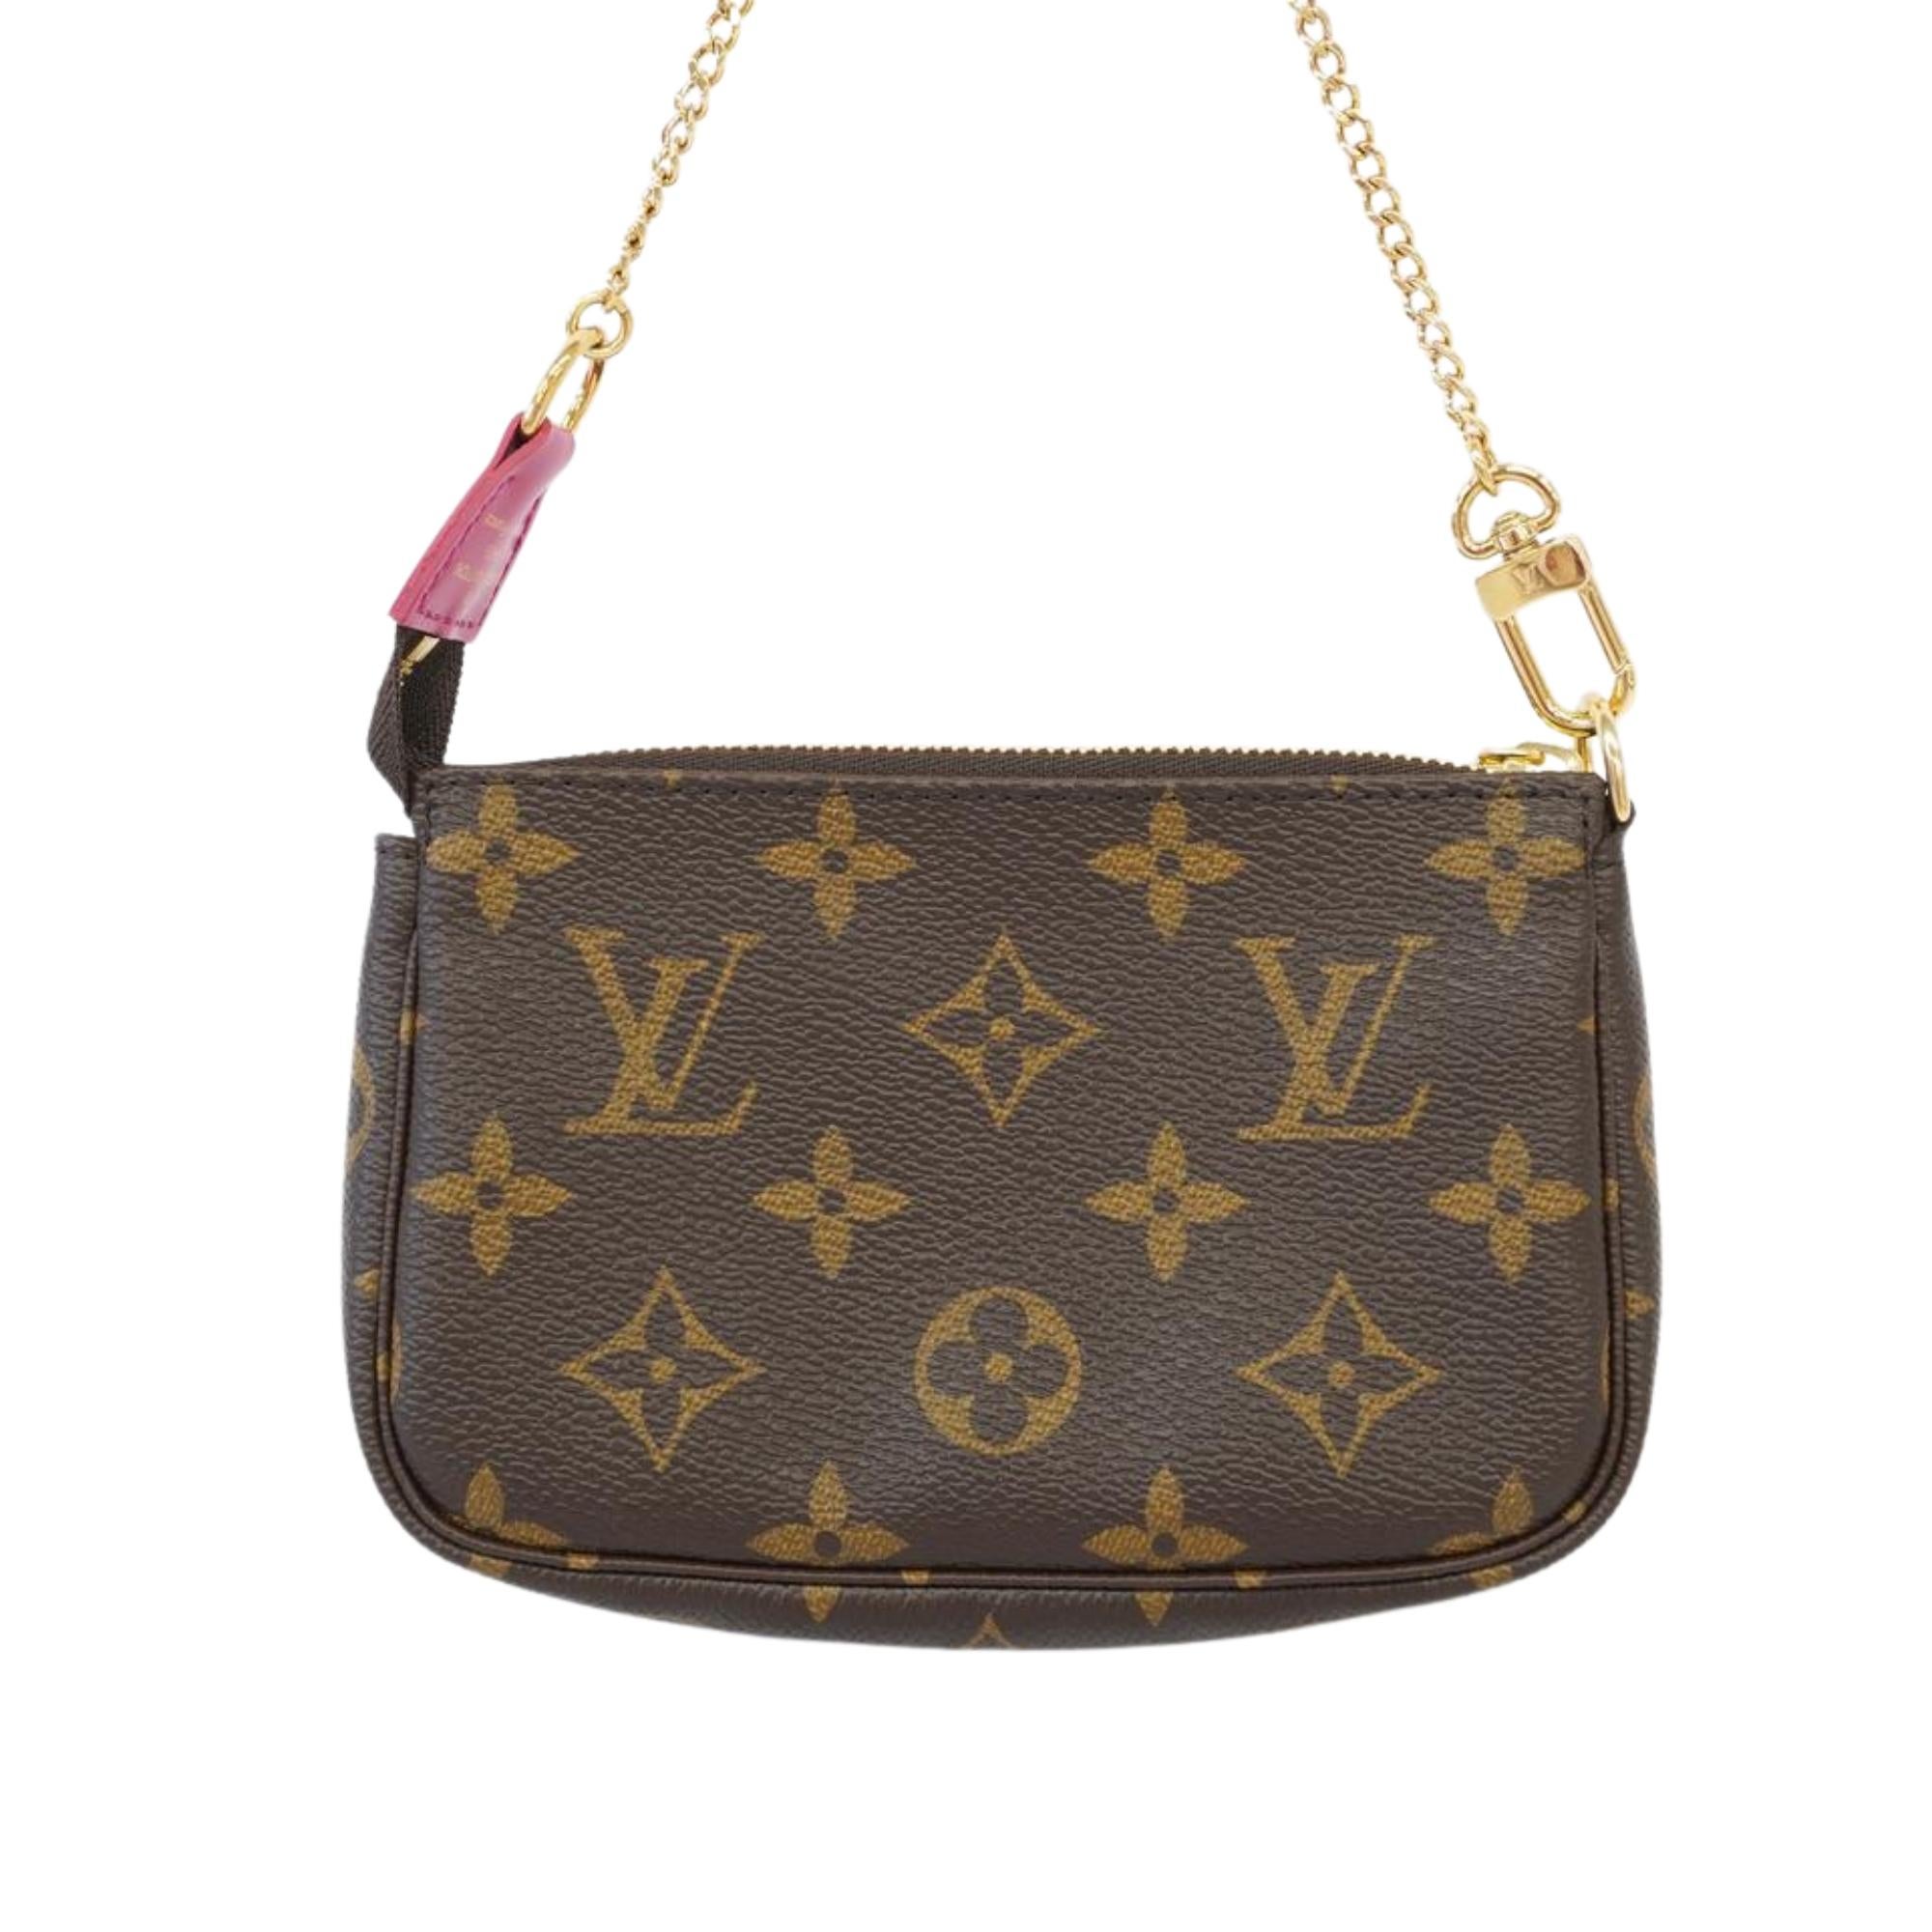 Louis Vuitton Christmas Limited Edition Mini Pochette Accessories (2020) In Good Condition For Sale In Montreal, Quebec